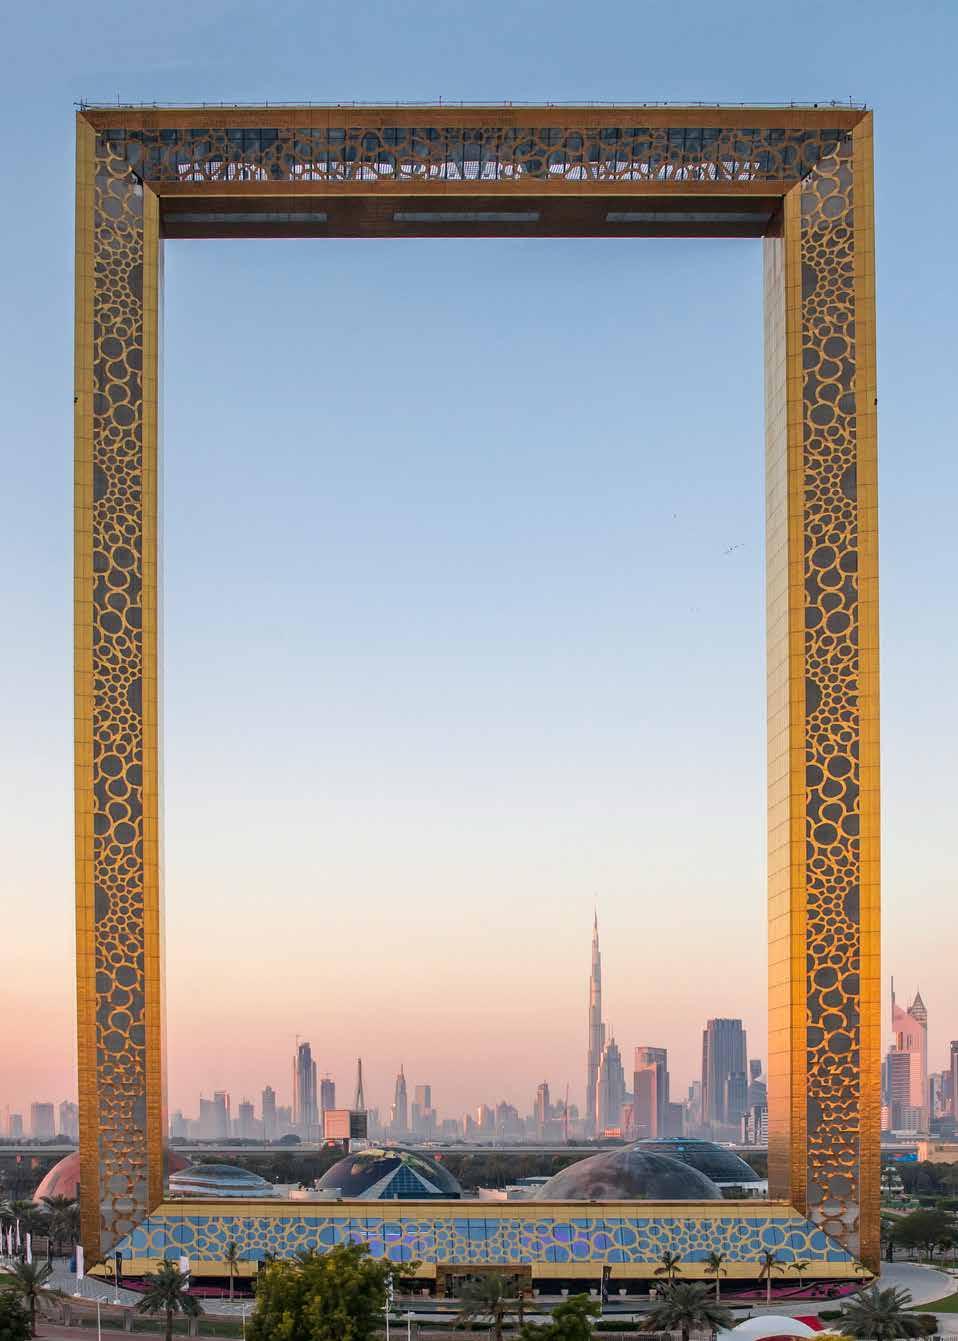 THE HUB REPORT 01 RESEARCH KEY FINDINGS OVERALL, DUBAI S STATUS AS A GLOBAL HUB WILL CONTINUE TO STRENGTHEN GIVEN ITS EXTENSIVE CONNECTIVITY, STRONG ECONOMIC PROSPECTS, LOW TAX SYSTEM AND SAFE HAVEN